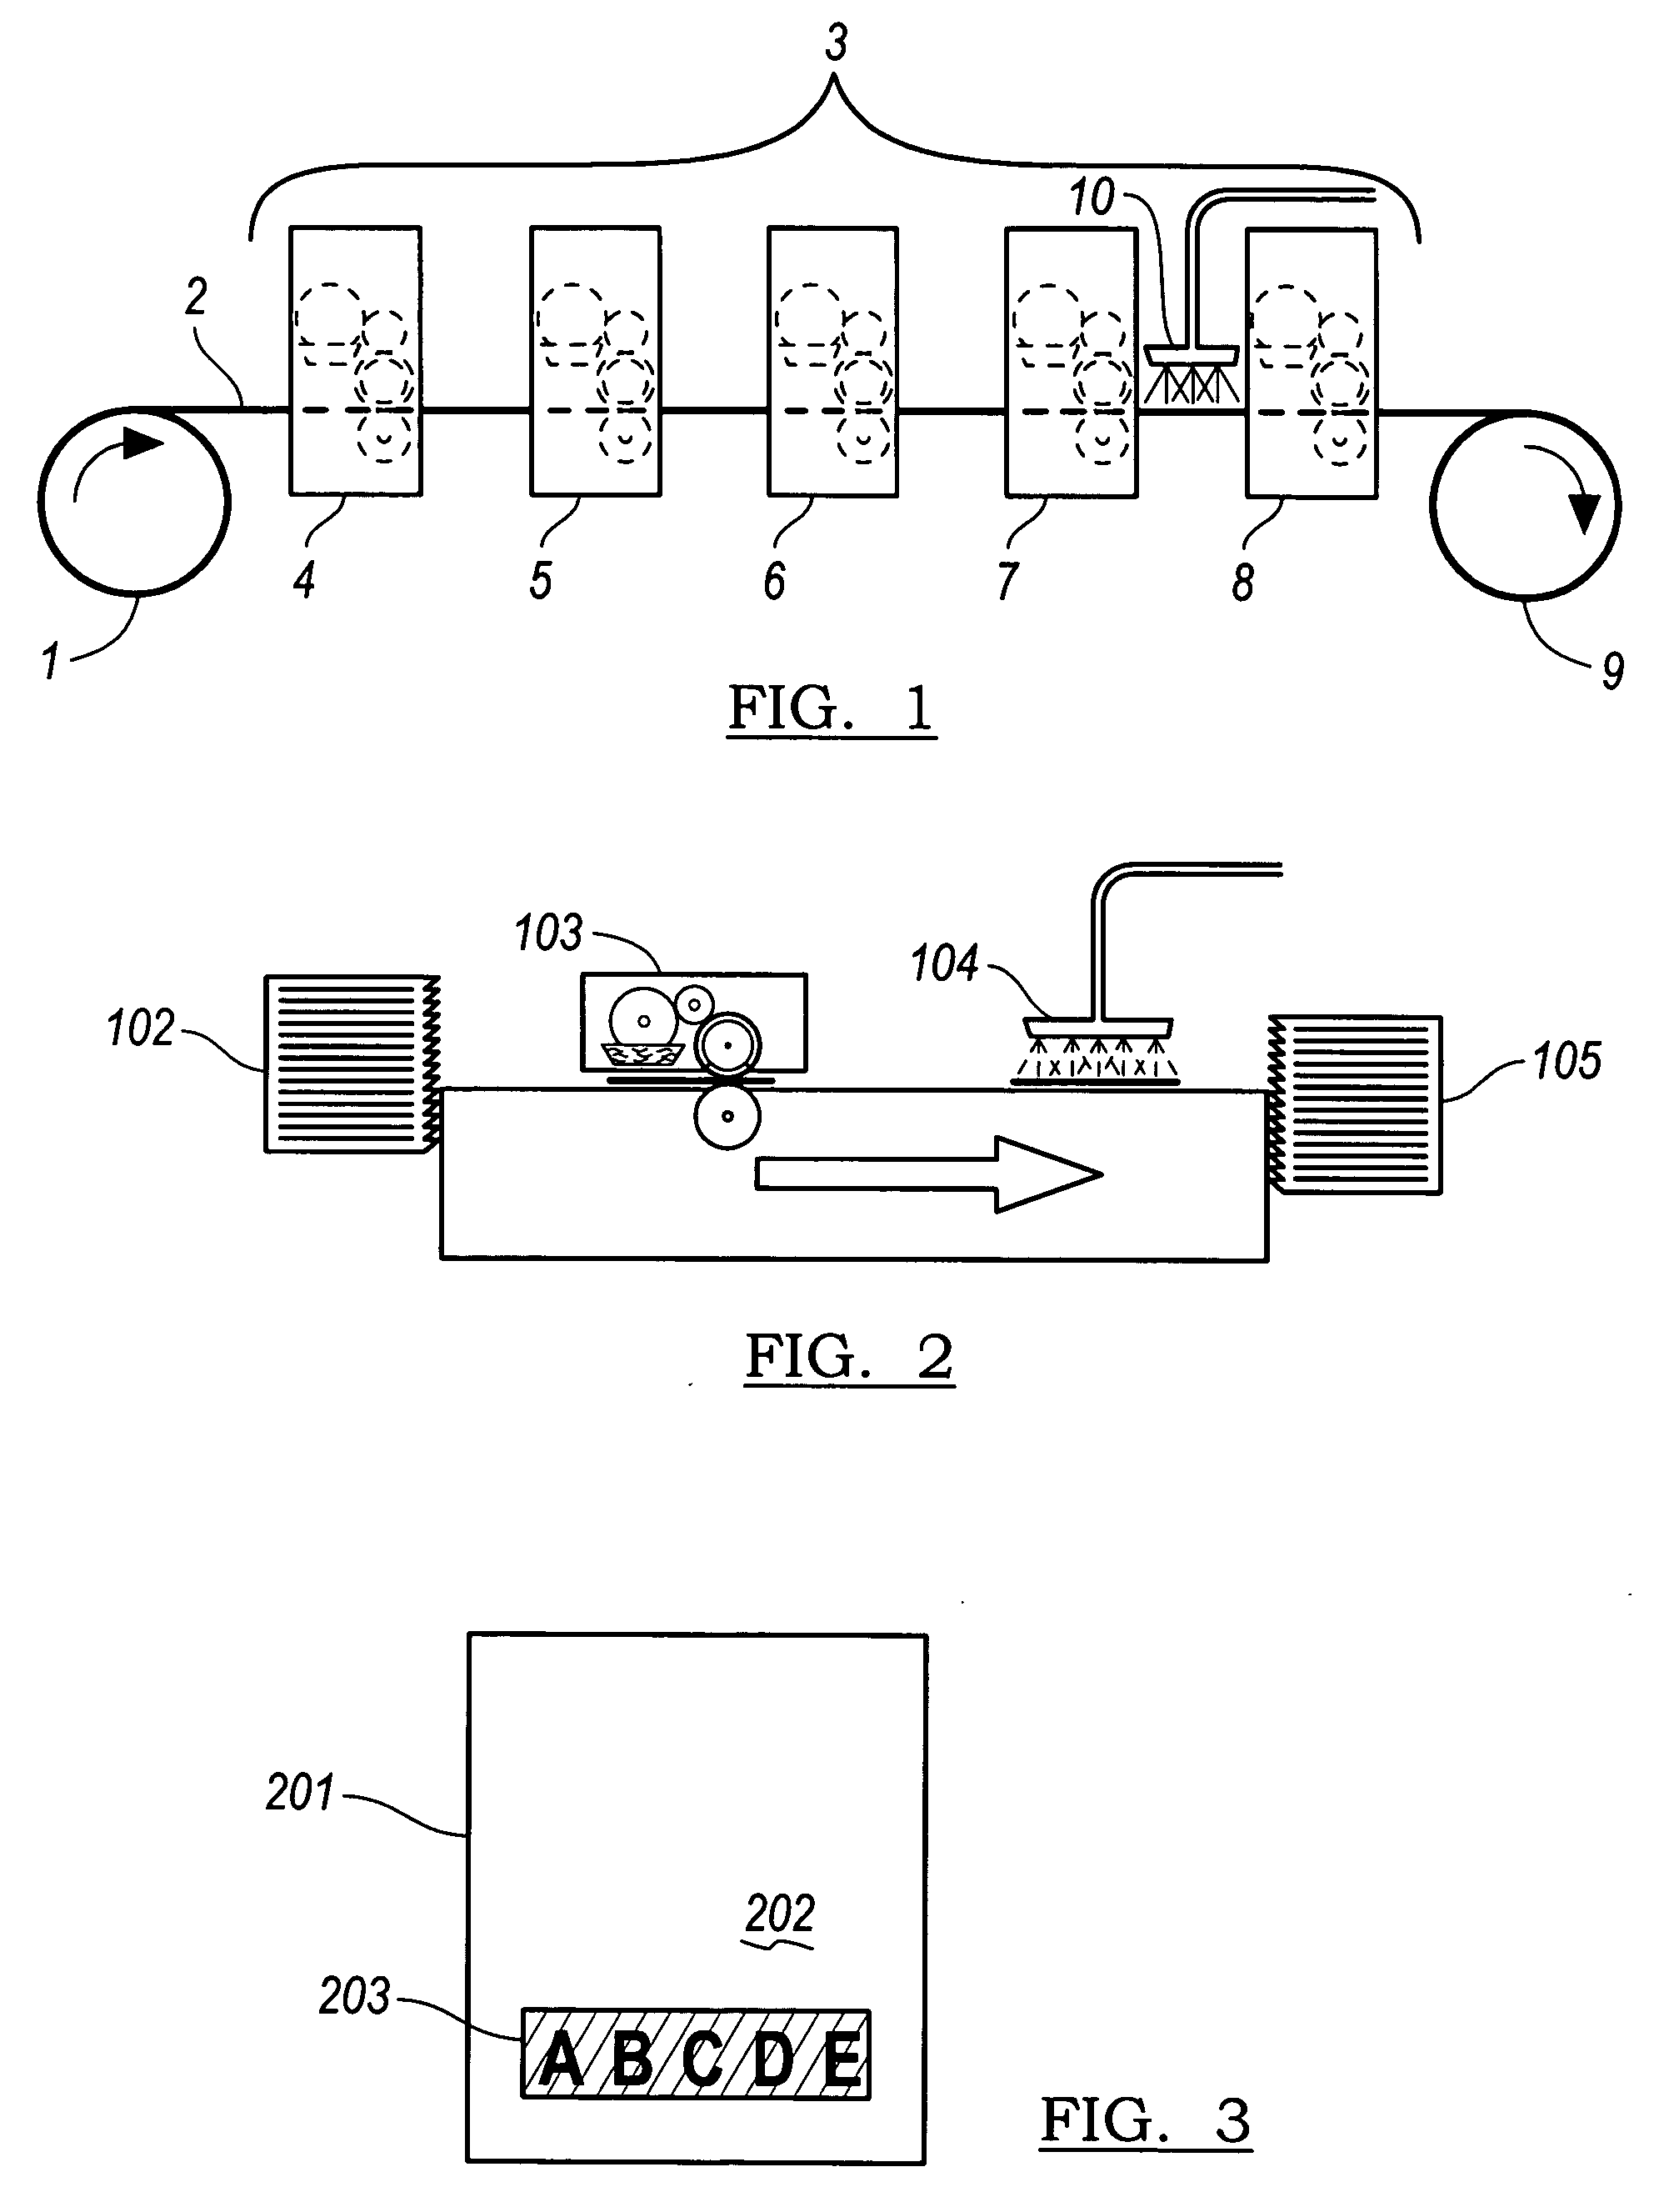 System and method for ink jet printing of solvent/oil based inks using ink-receptive coatings